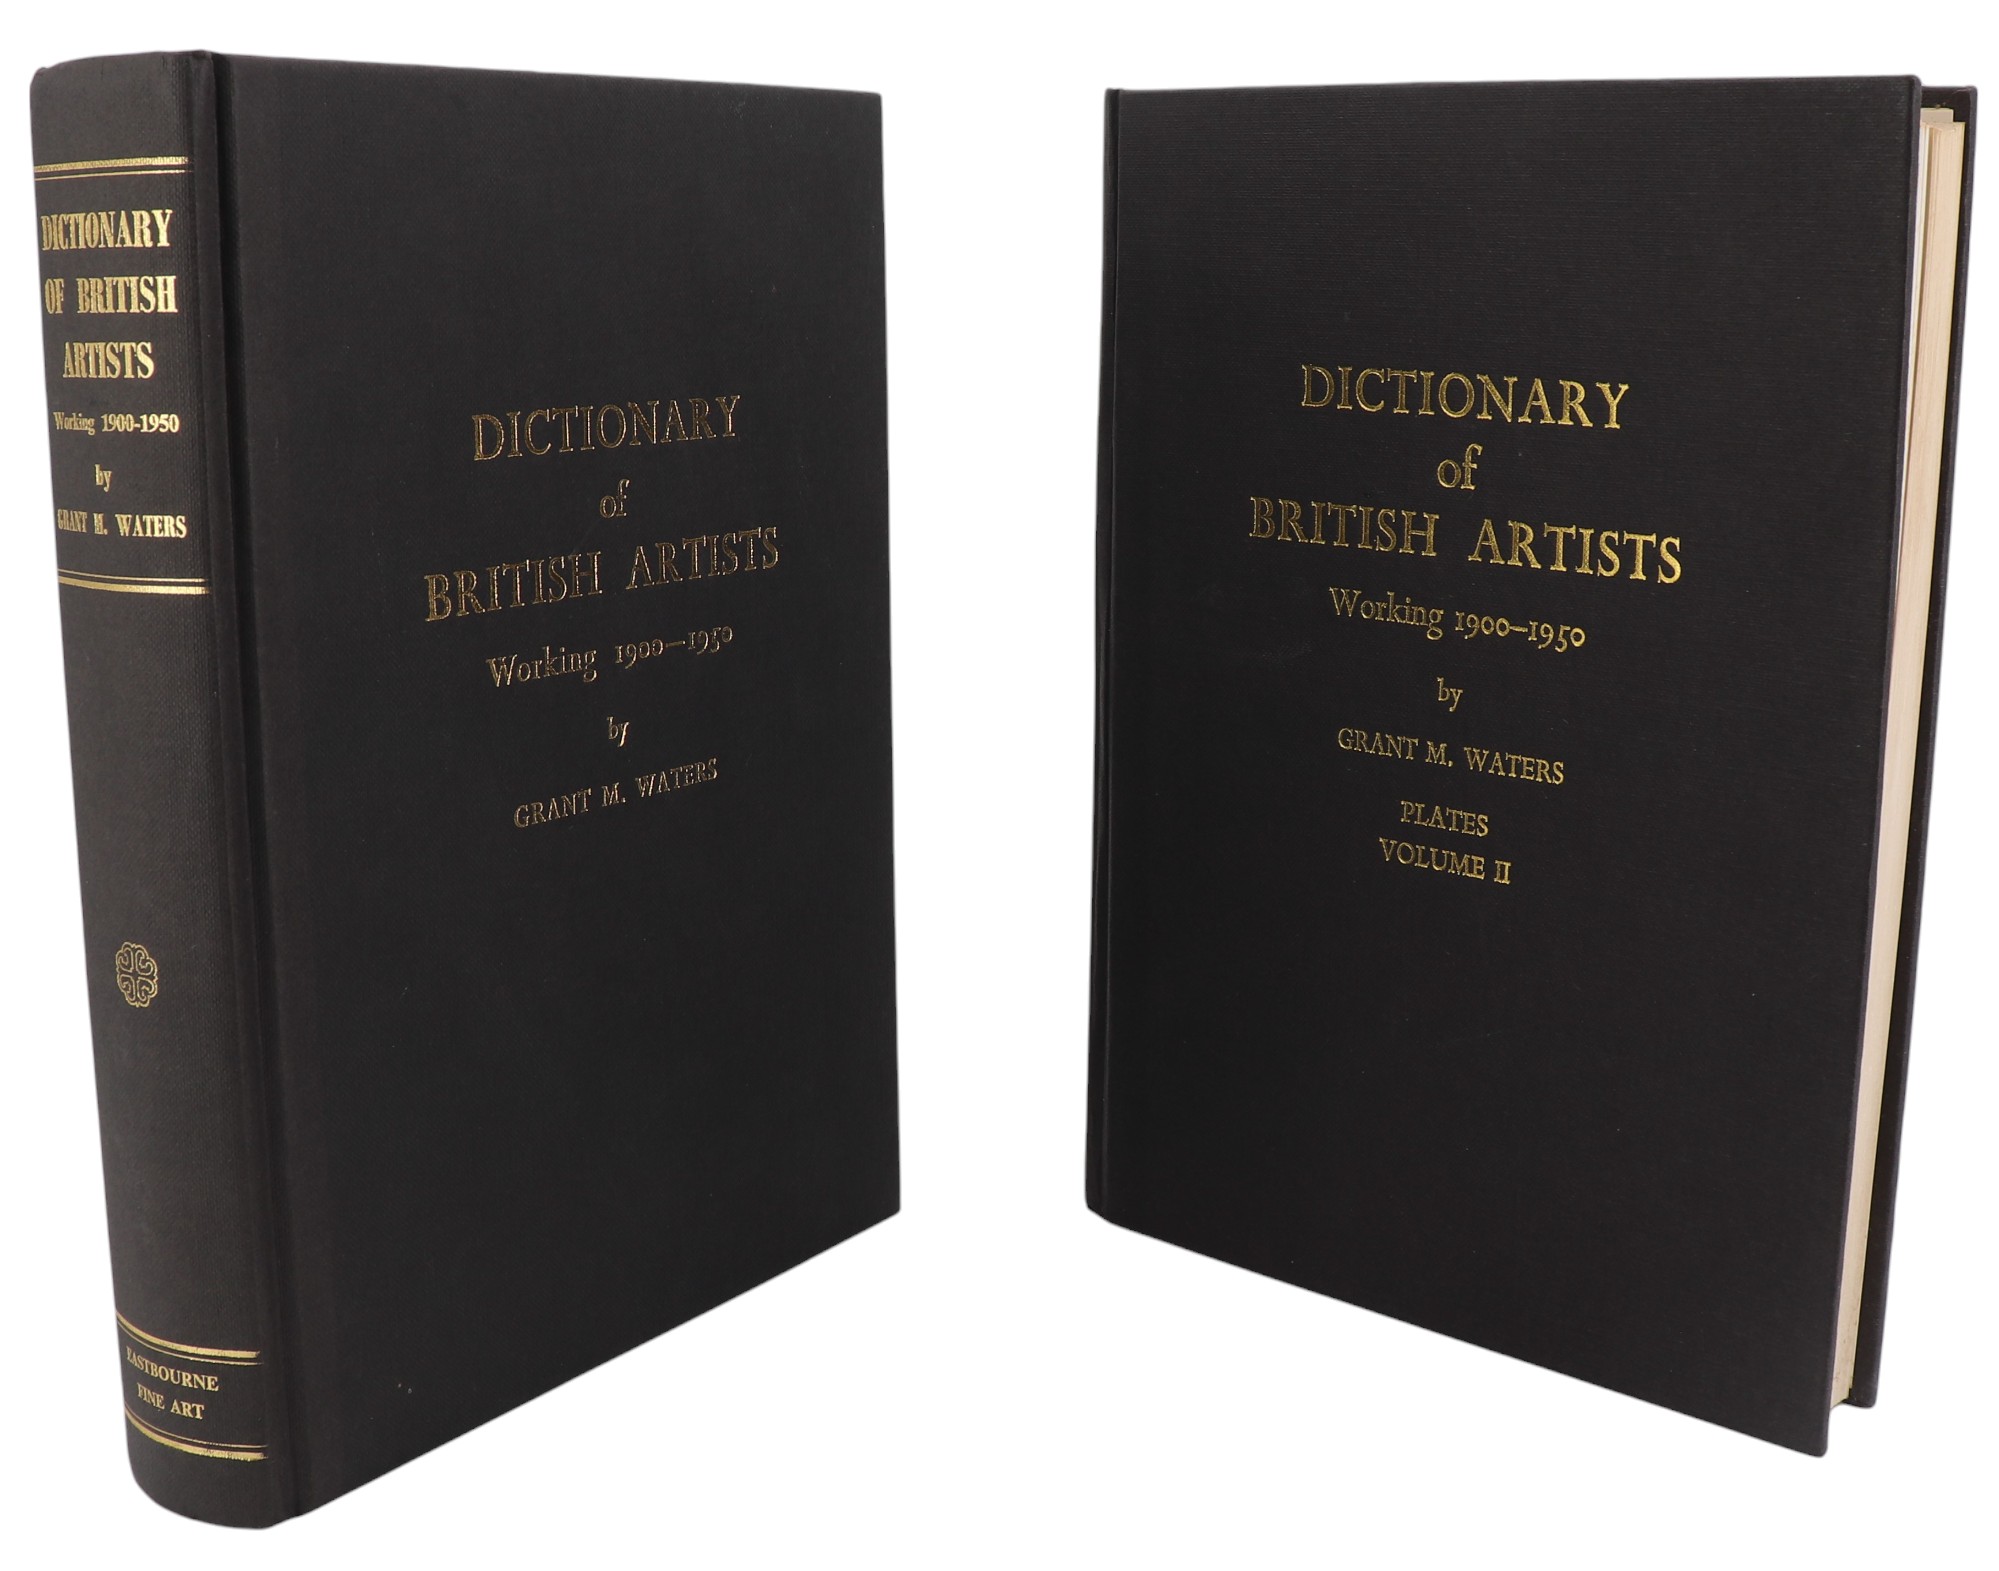 Grant M Waters, "Dictionary of British Artists working 1900-1950", Eastbourne Fine Art, 1975, 2